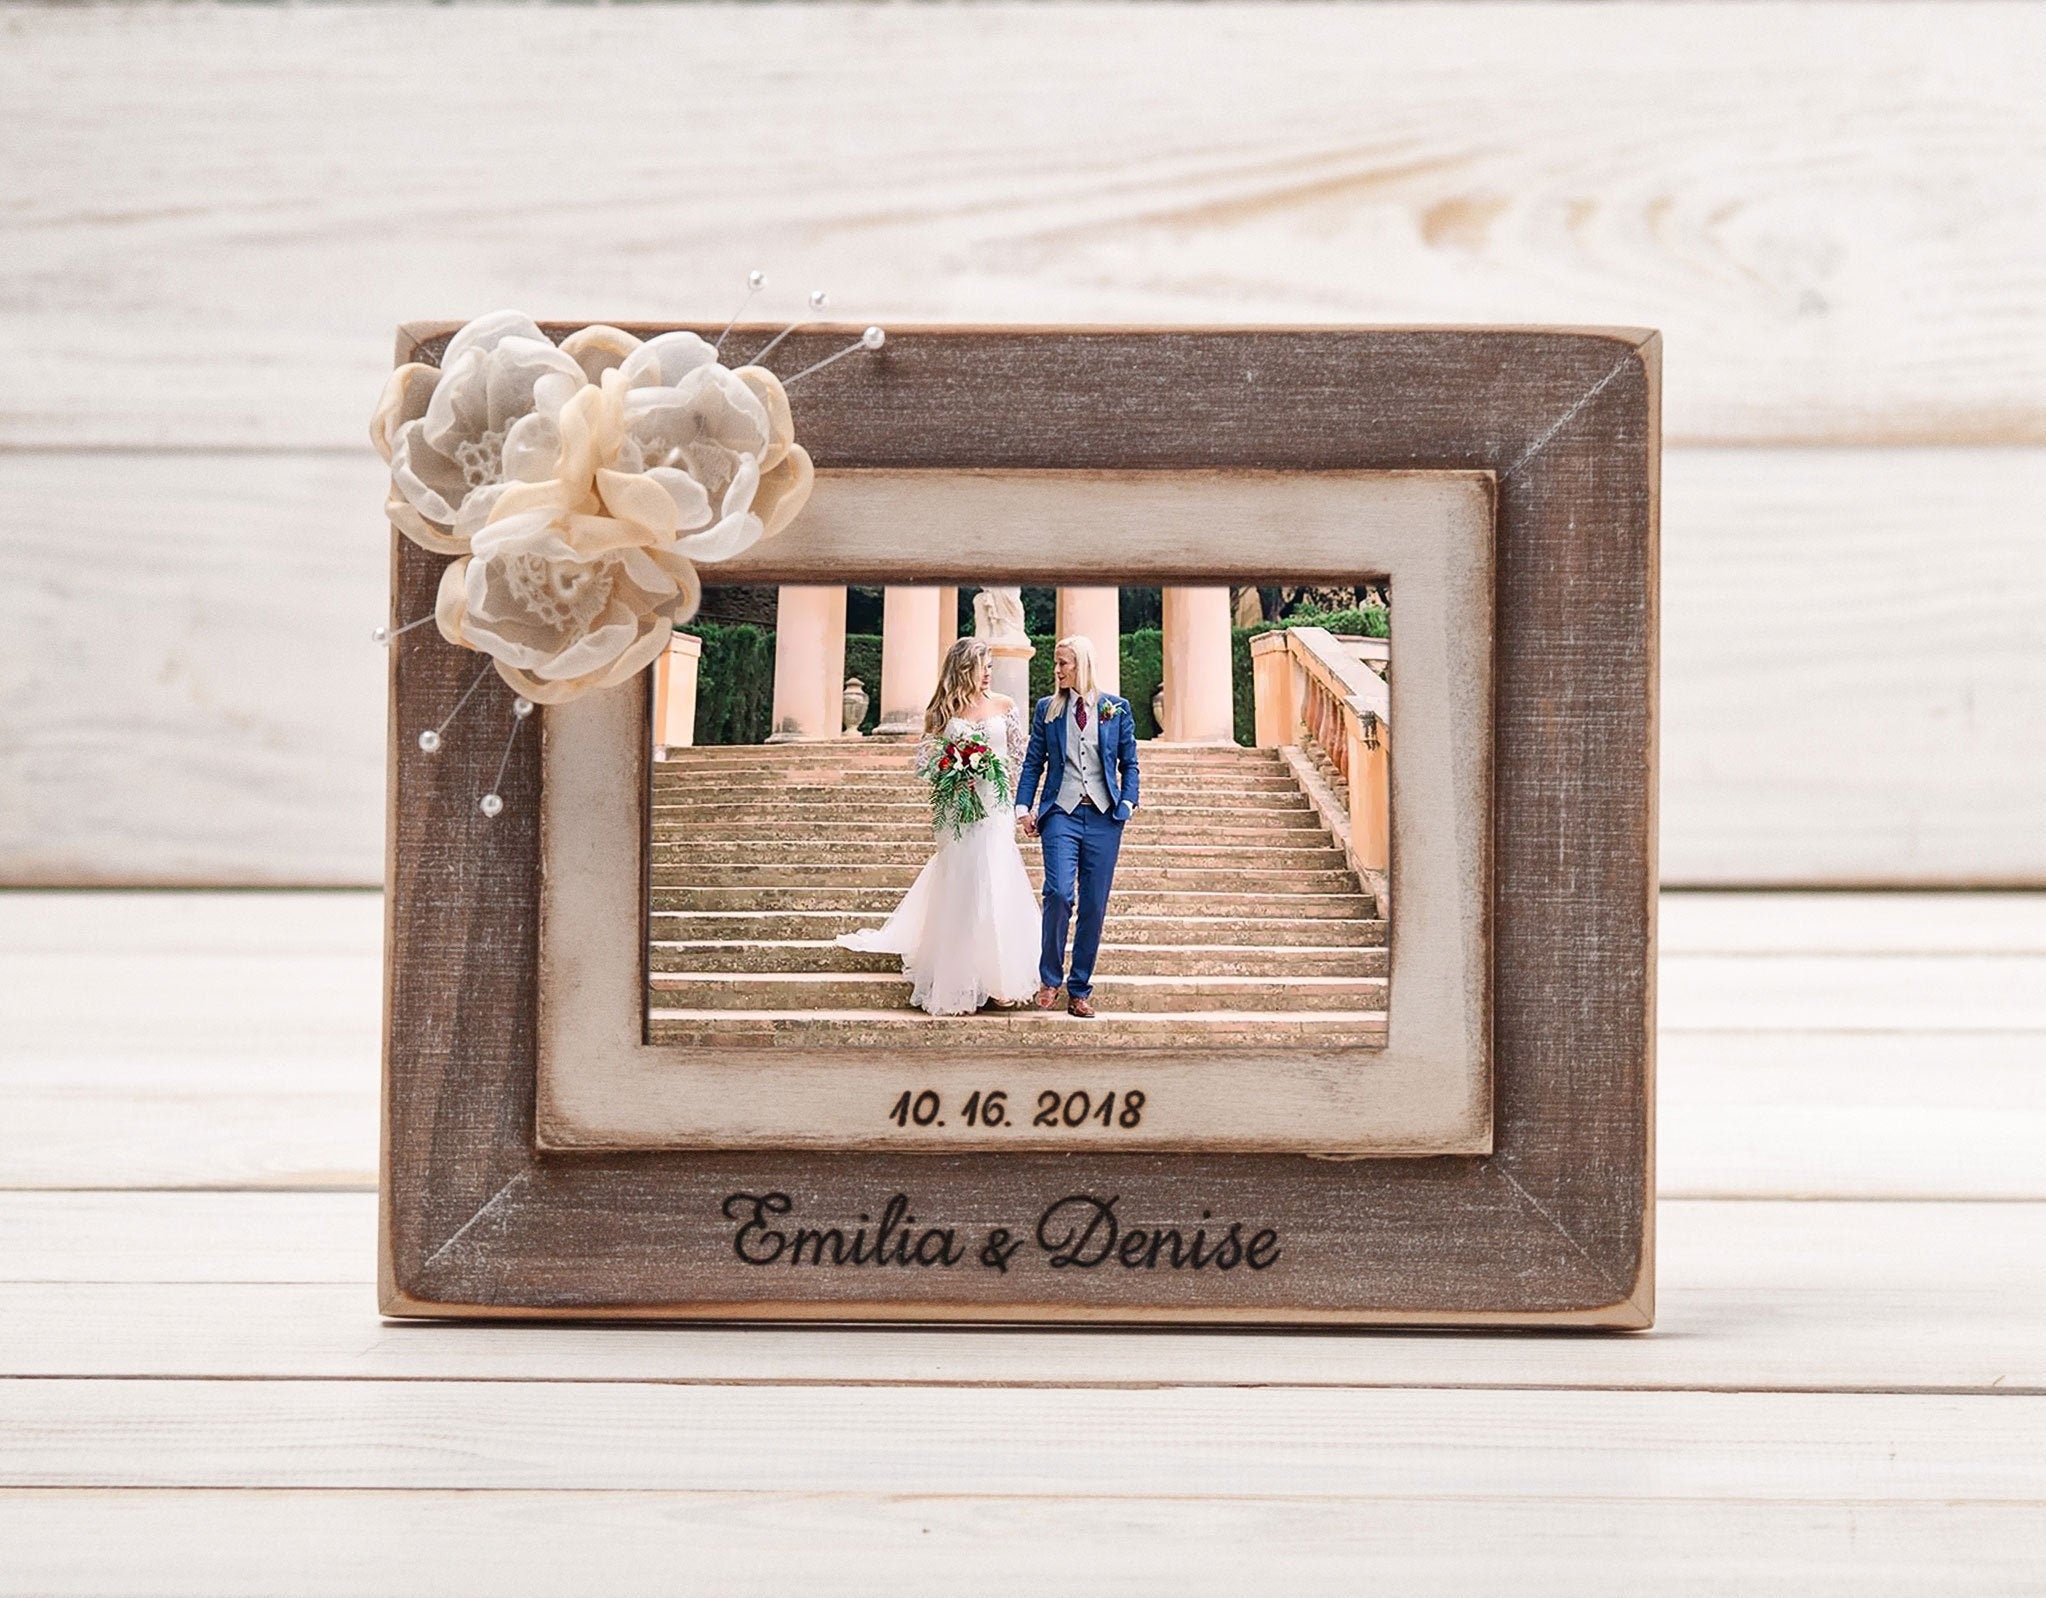 Personalized Wood Photo Frame - Generations of Family - 4x6